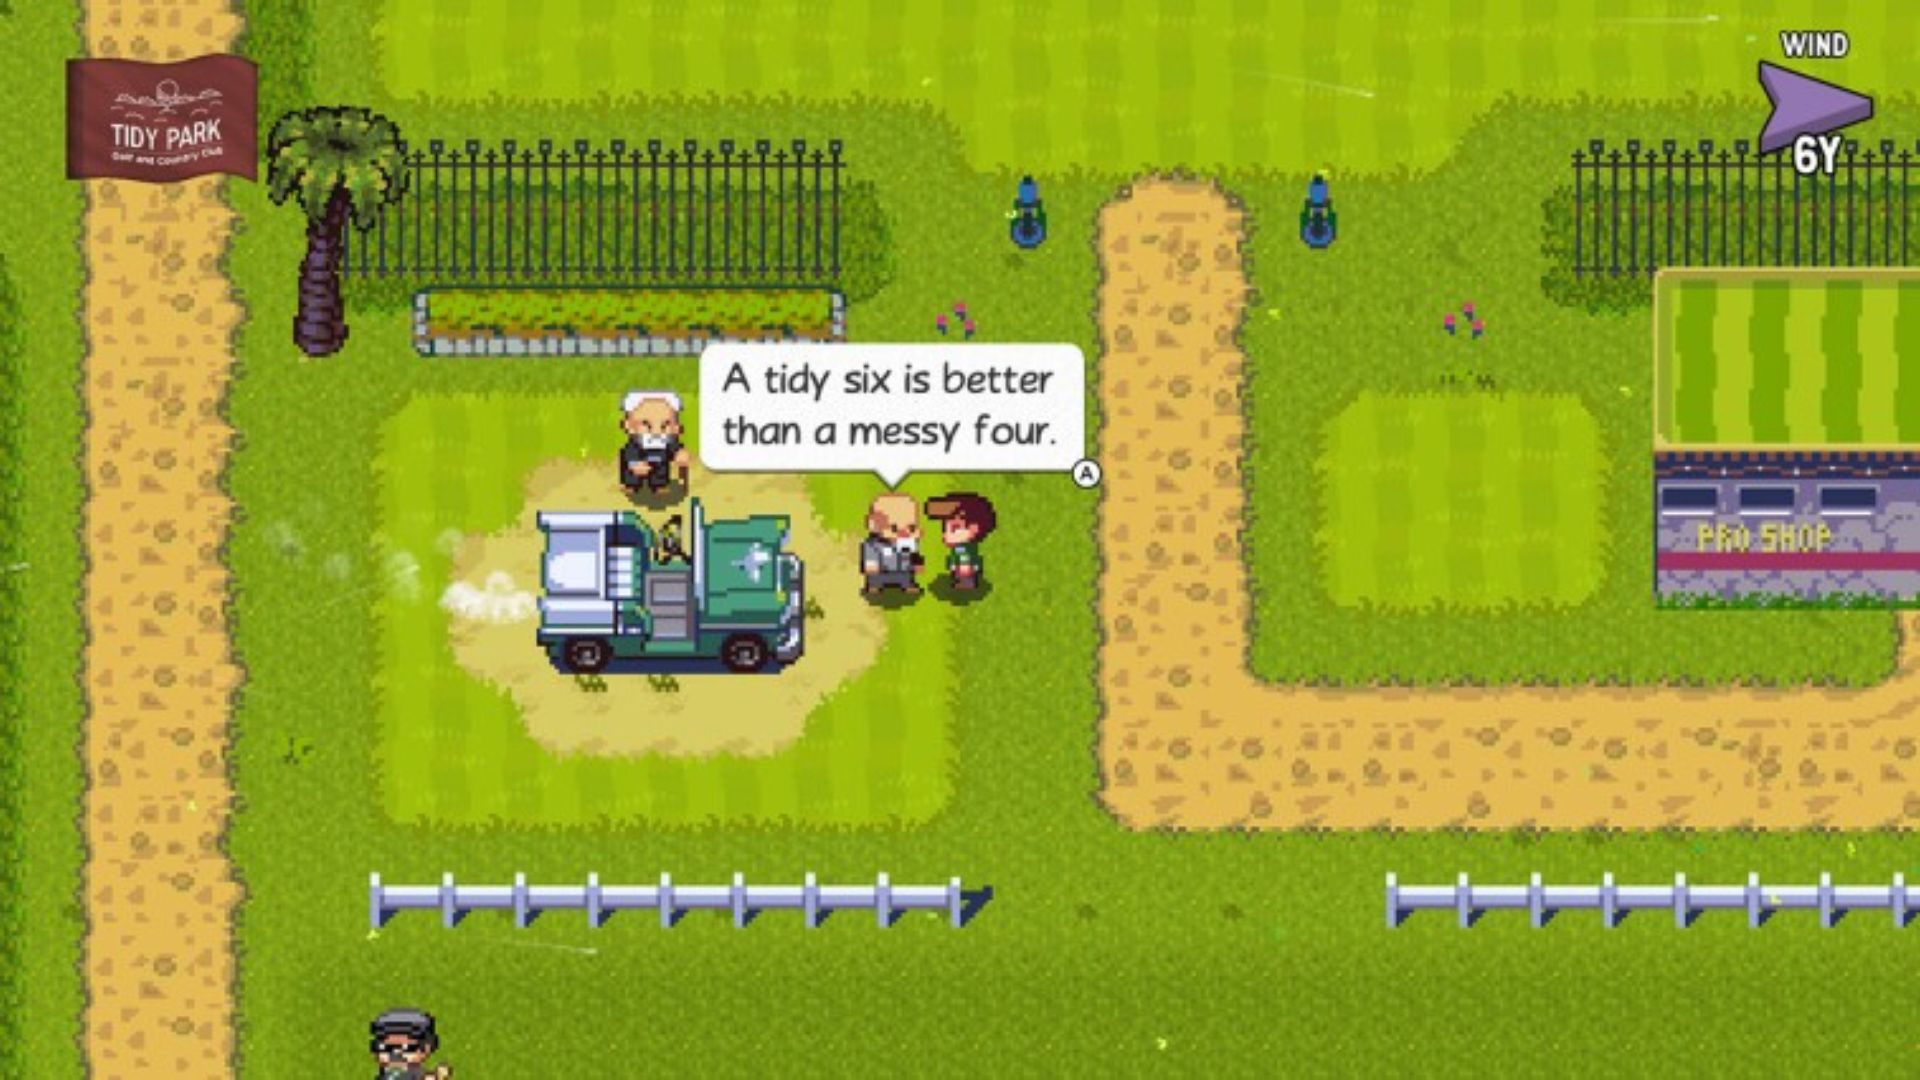 A man says "a tidy six is better than a messy four" to the main character from the relaxing game Golf Story. They are near a gold buggy in a sand trap, next to a path, a golf green, and an old man.